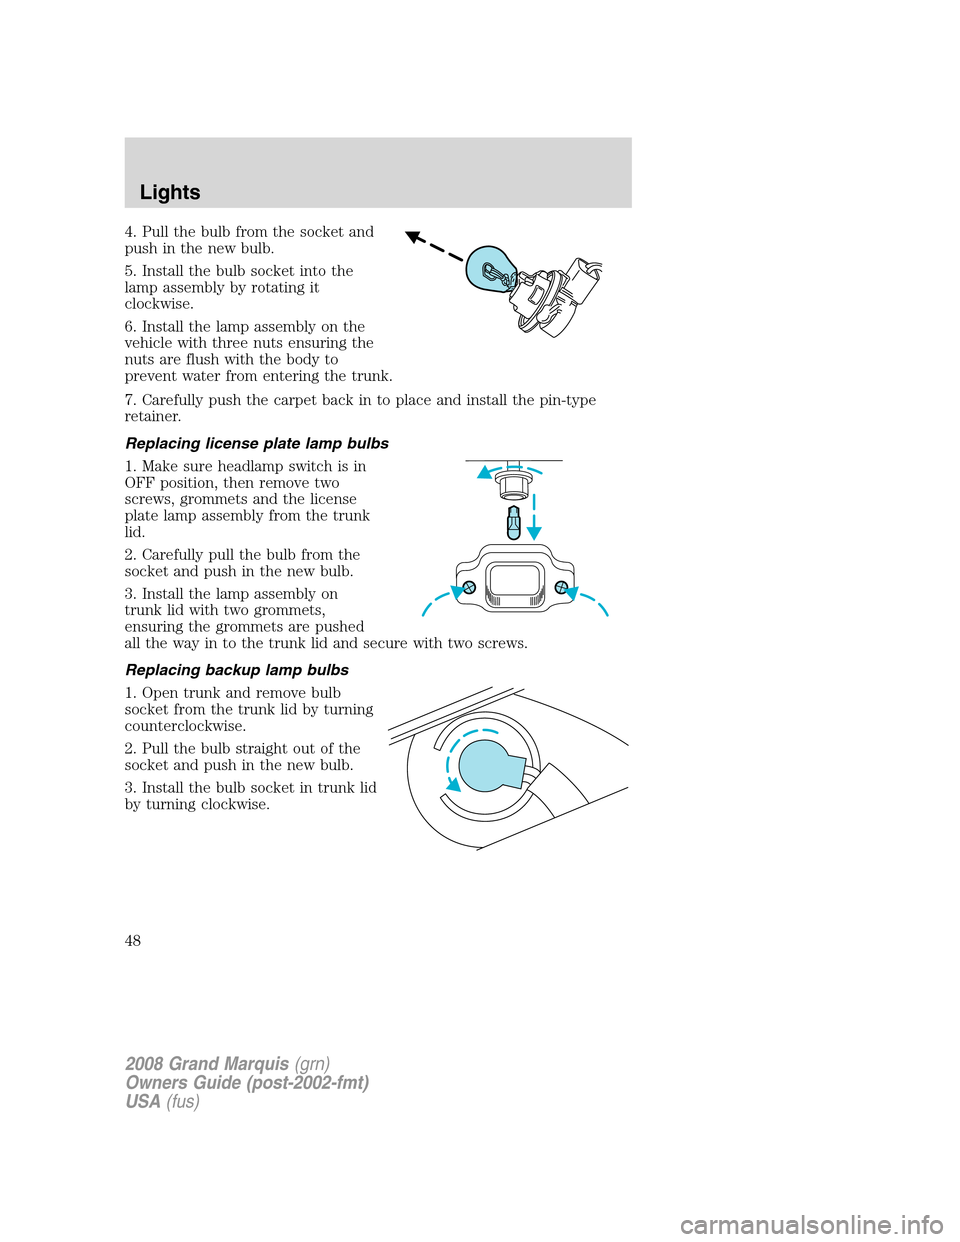 Mercury Grand Marquis 2008  s Service Manual 4. Pull the bulb from the socket and
push in the new bulb.
5. Install the bulb socket into the
lamp assembly by rotating it
clockwise.
6. Install the lamp assembly on the
vehicle with three nuts ensur